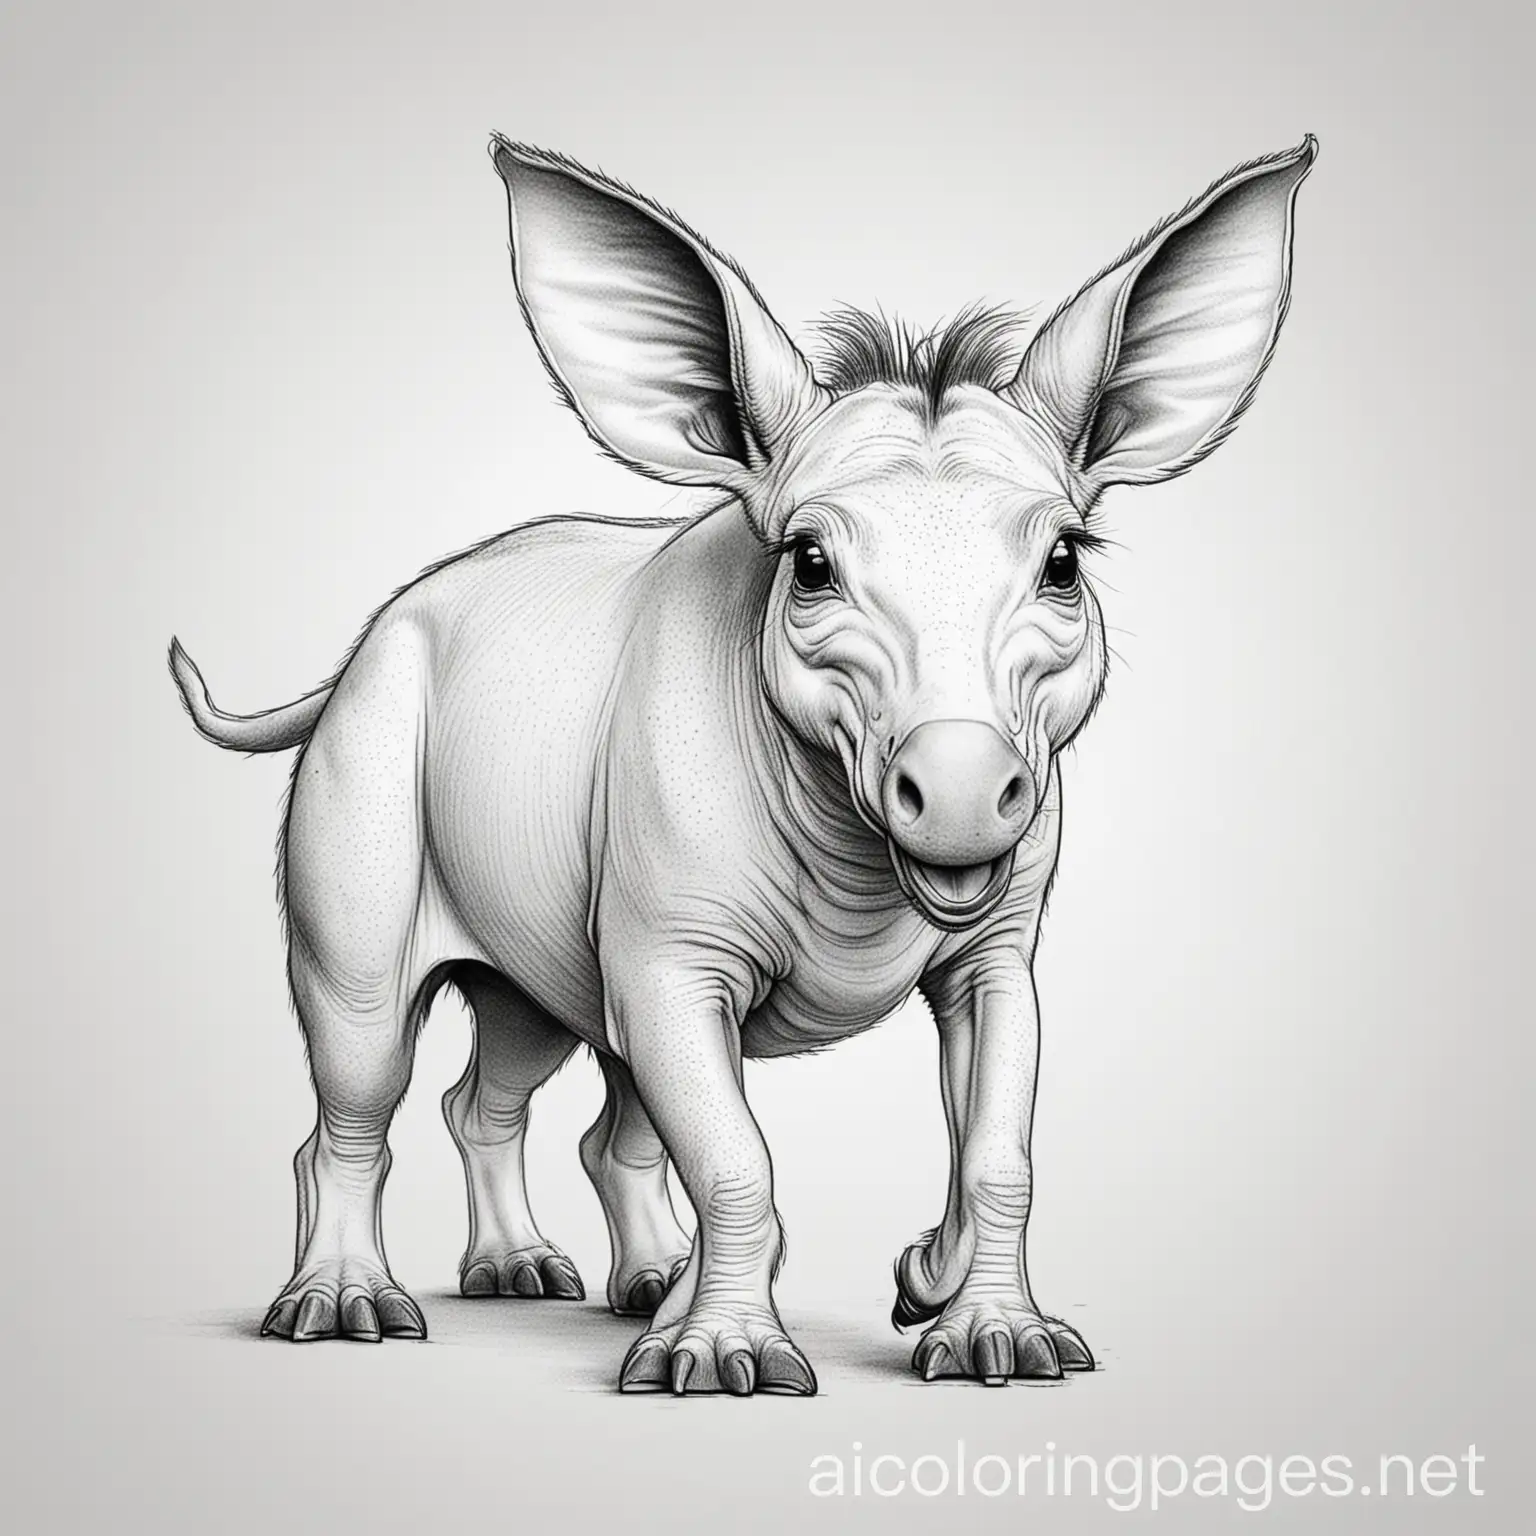 Cheerful-Aardvark-Coloring-Page-Simple-Line-Art-on-White-Background